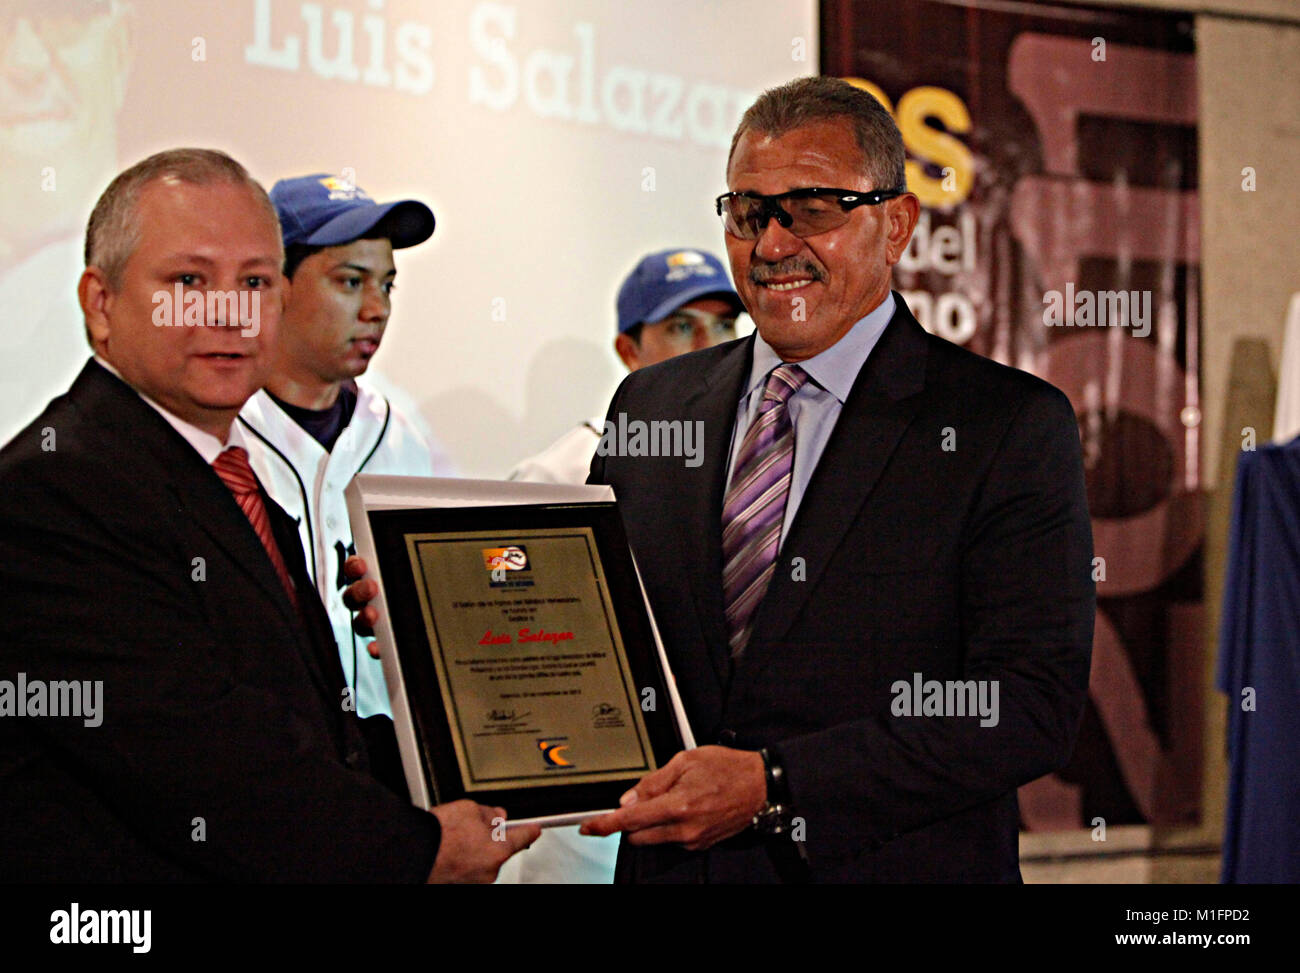 Naguanagua, Carabobo, Venezuela. 20th Nov, 2012. November 20, 2012. Luis Salazar (R) receives a plaque of recognition from the hands of Giner Garc'a (L) during the ceremony of exaltation to the hall of fame of Venezuelan baseball, at the headquarters of the baseball museum. Luis Salazar played for 13 seasons in the big leagues for organizations like San Diego, White Sox, Detroit and the Cubs. Photo: Juan Carlos Hernandez Credit: Juan Carlos Hernandez/ZUMA Wire/Alamy Live News Stock Photo